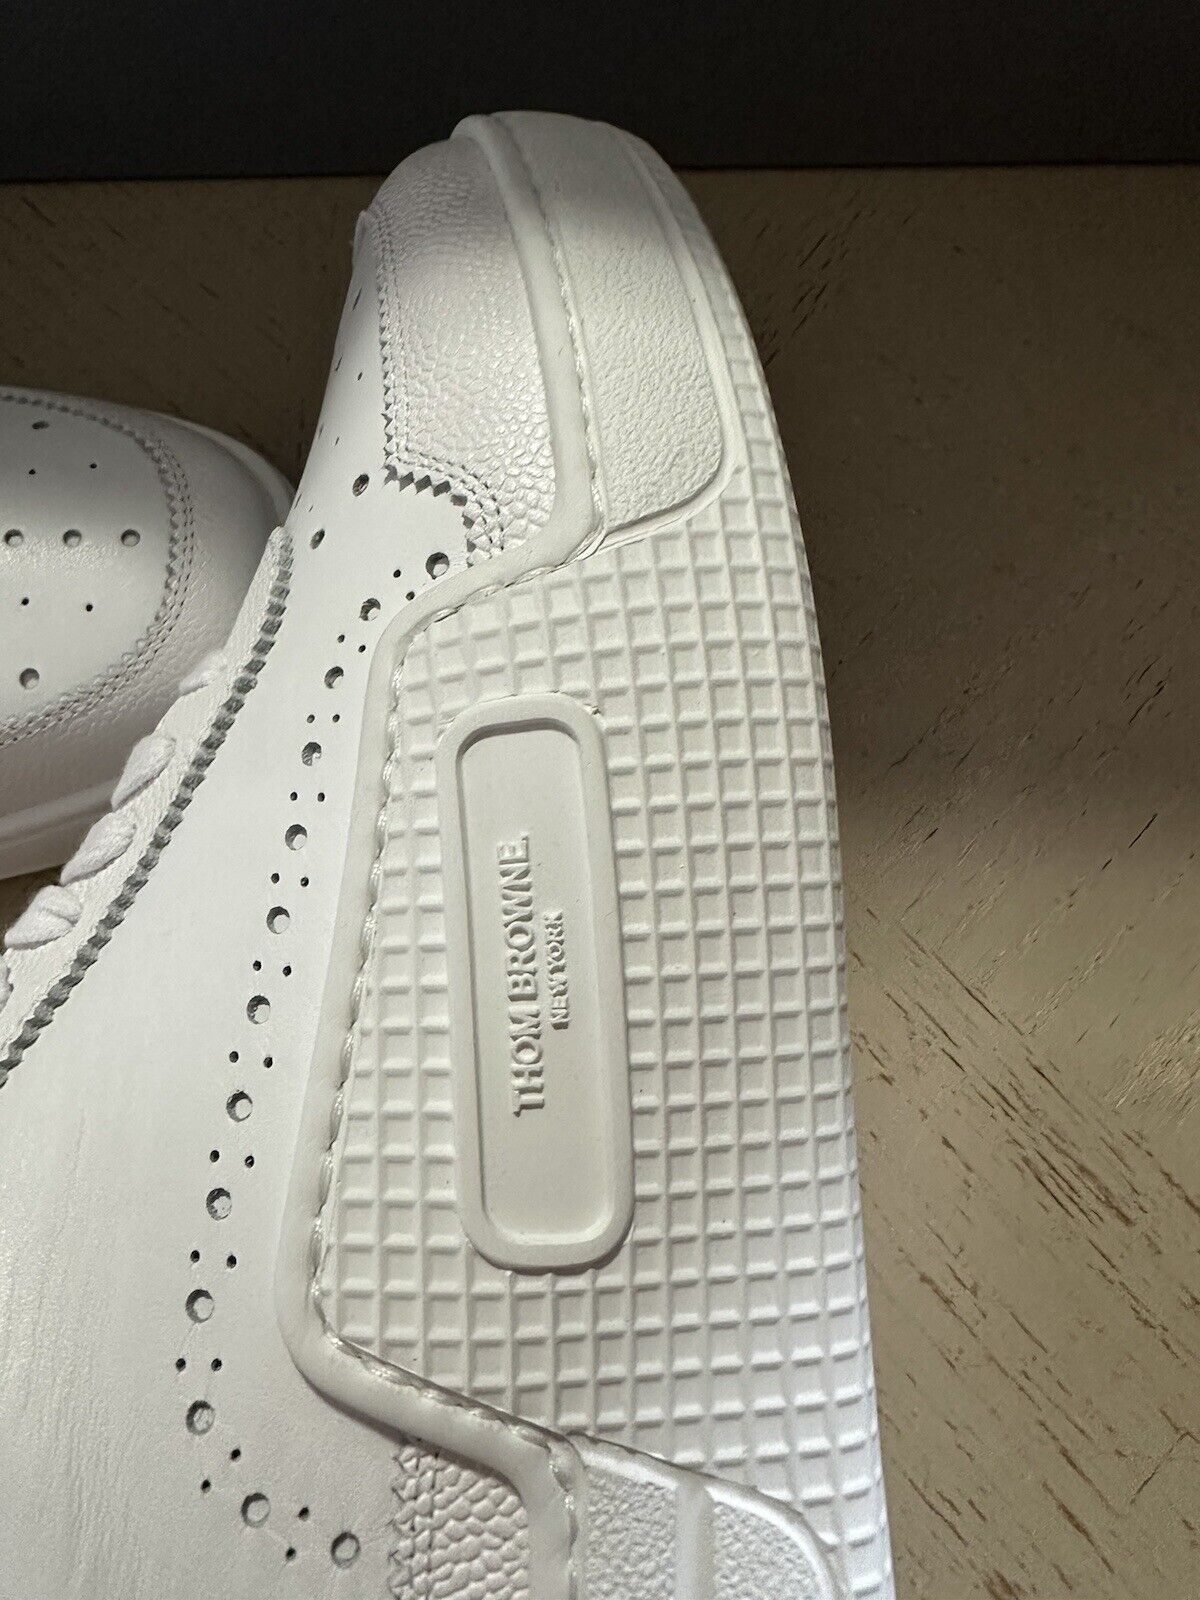 NIB Thom Browne Men Perforated Low Top Leather Sneakers White 11 US/44 EU Italy